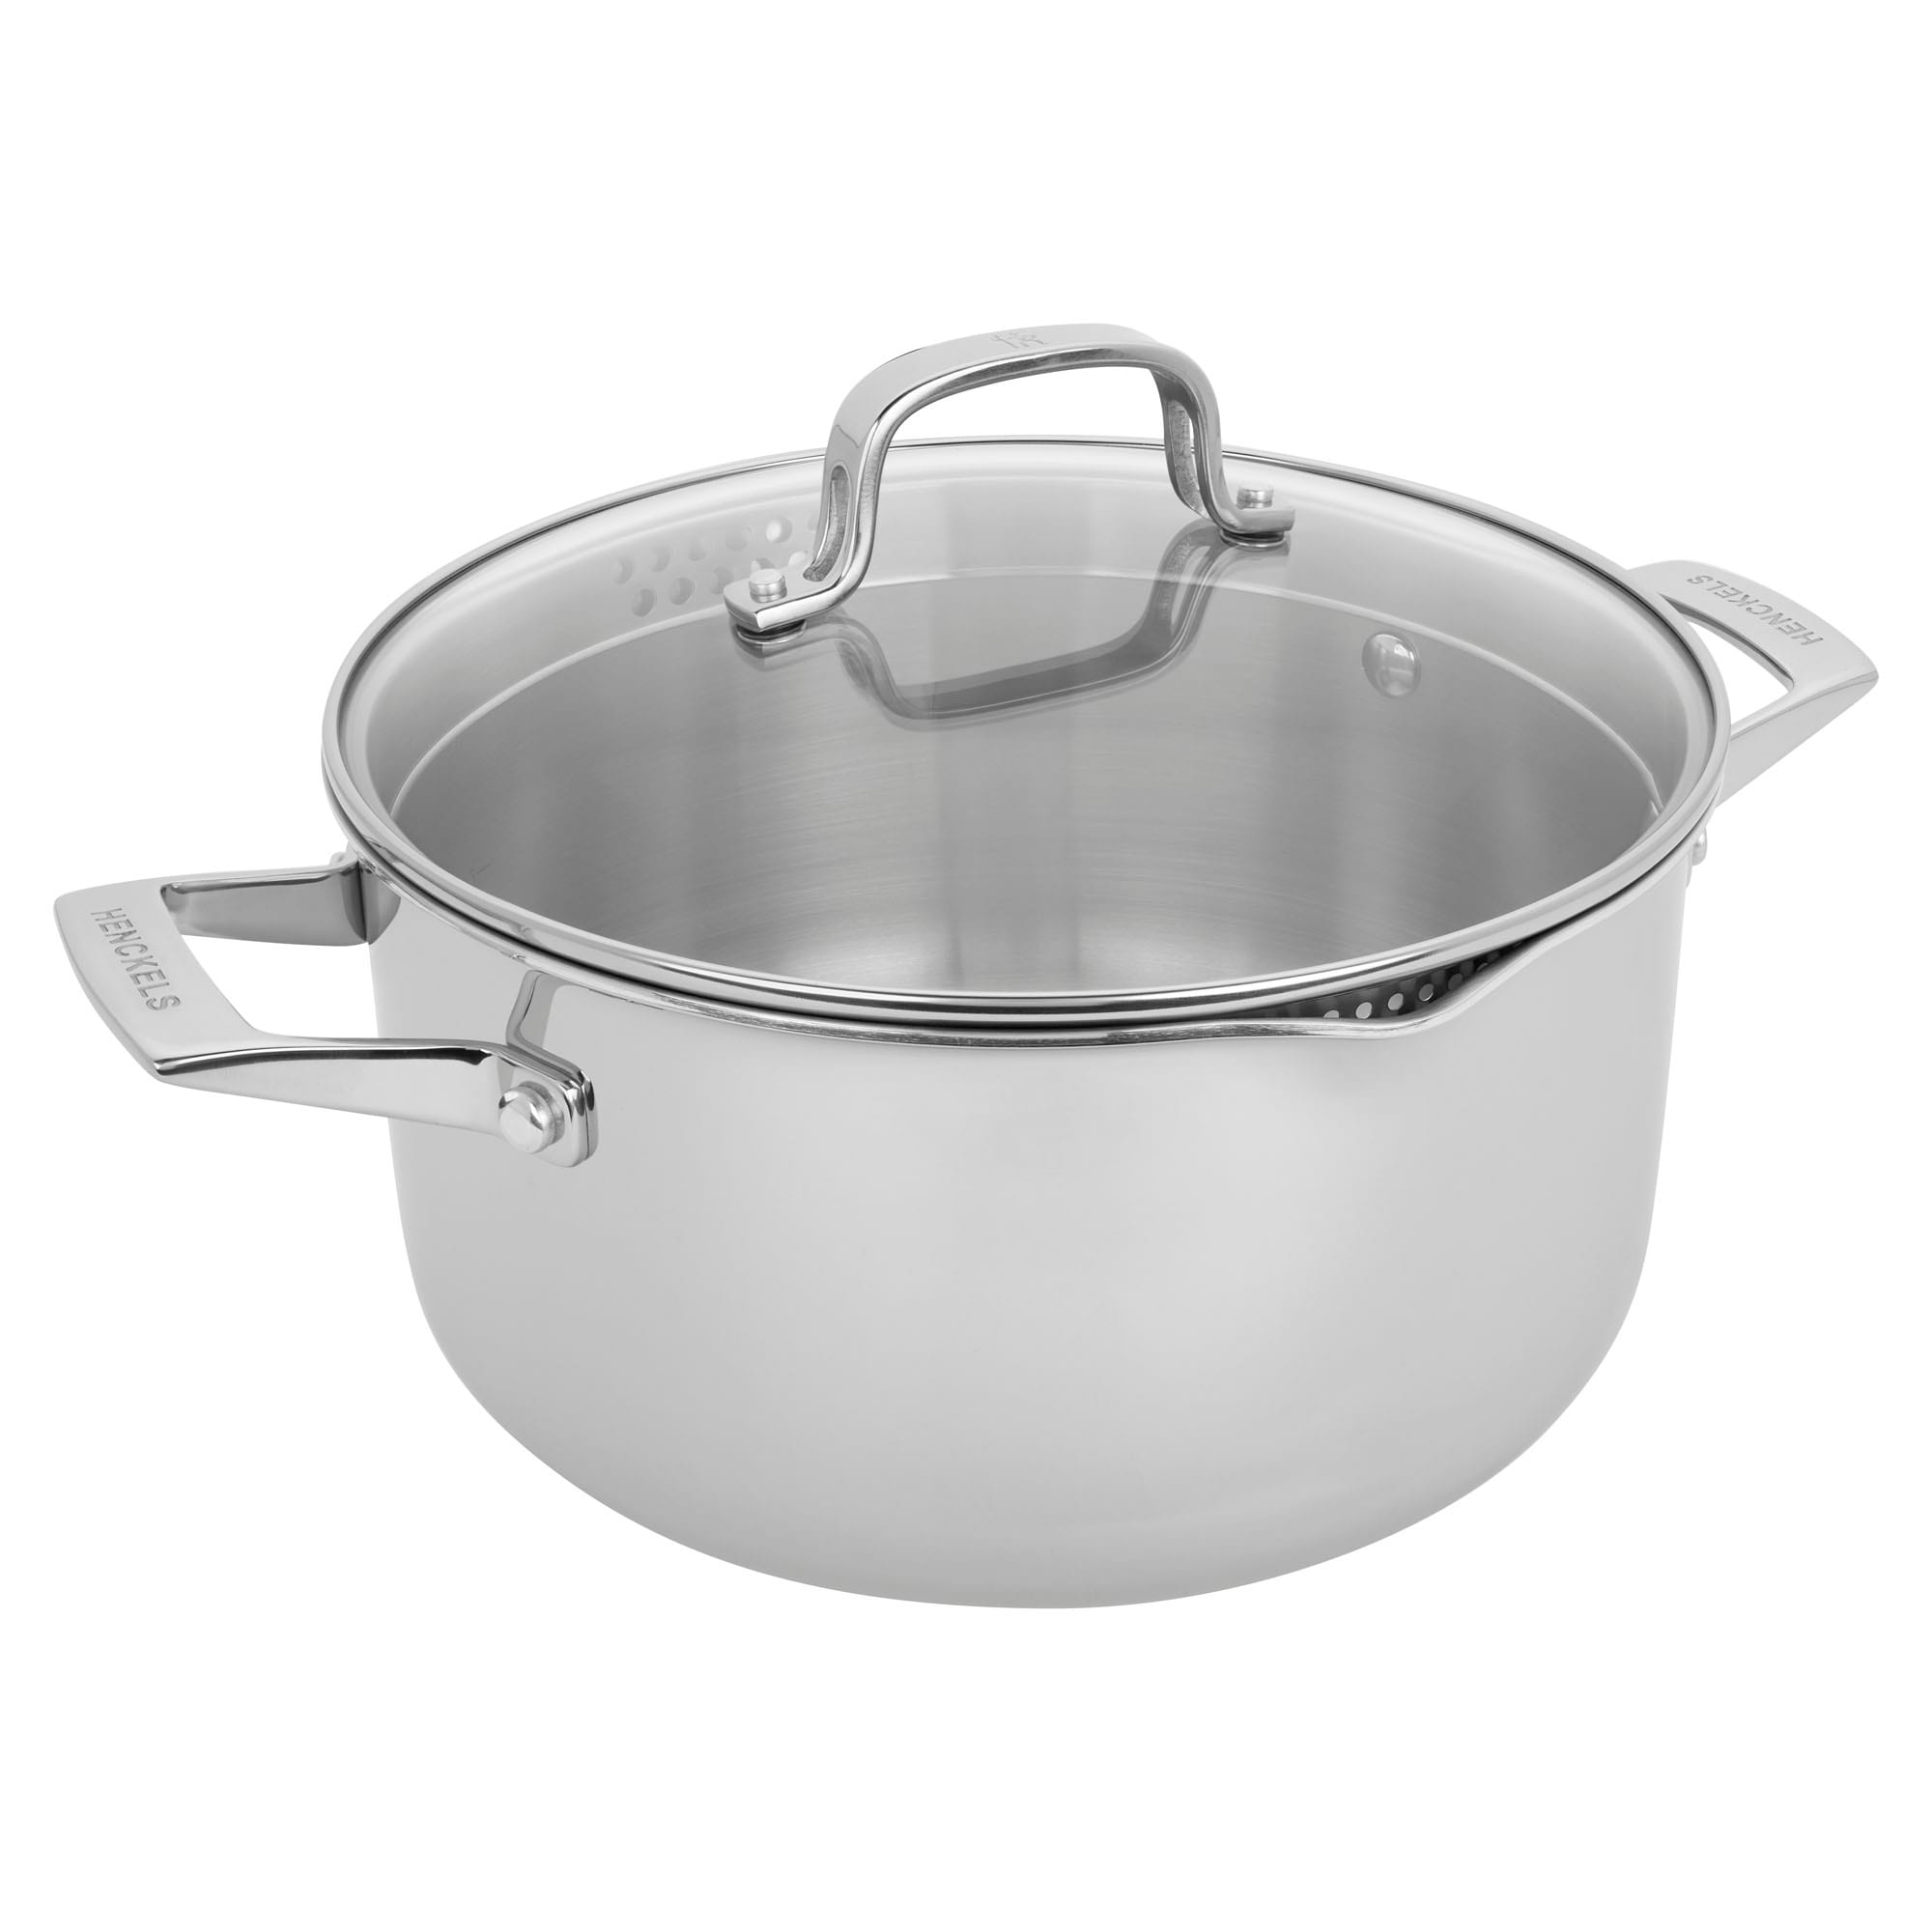 https://ak1.ostkcdn.com/images/products/is/images/direct/71dc744c89a9913024dbbaa8105e449709cc2dc0/Henckels-Clad-H3-6-qt-Stainless-Steel-Dutch-Oven-with-Lid.jpg